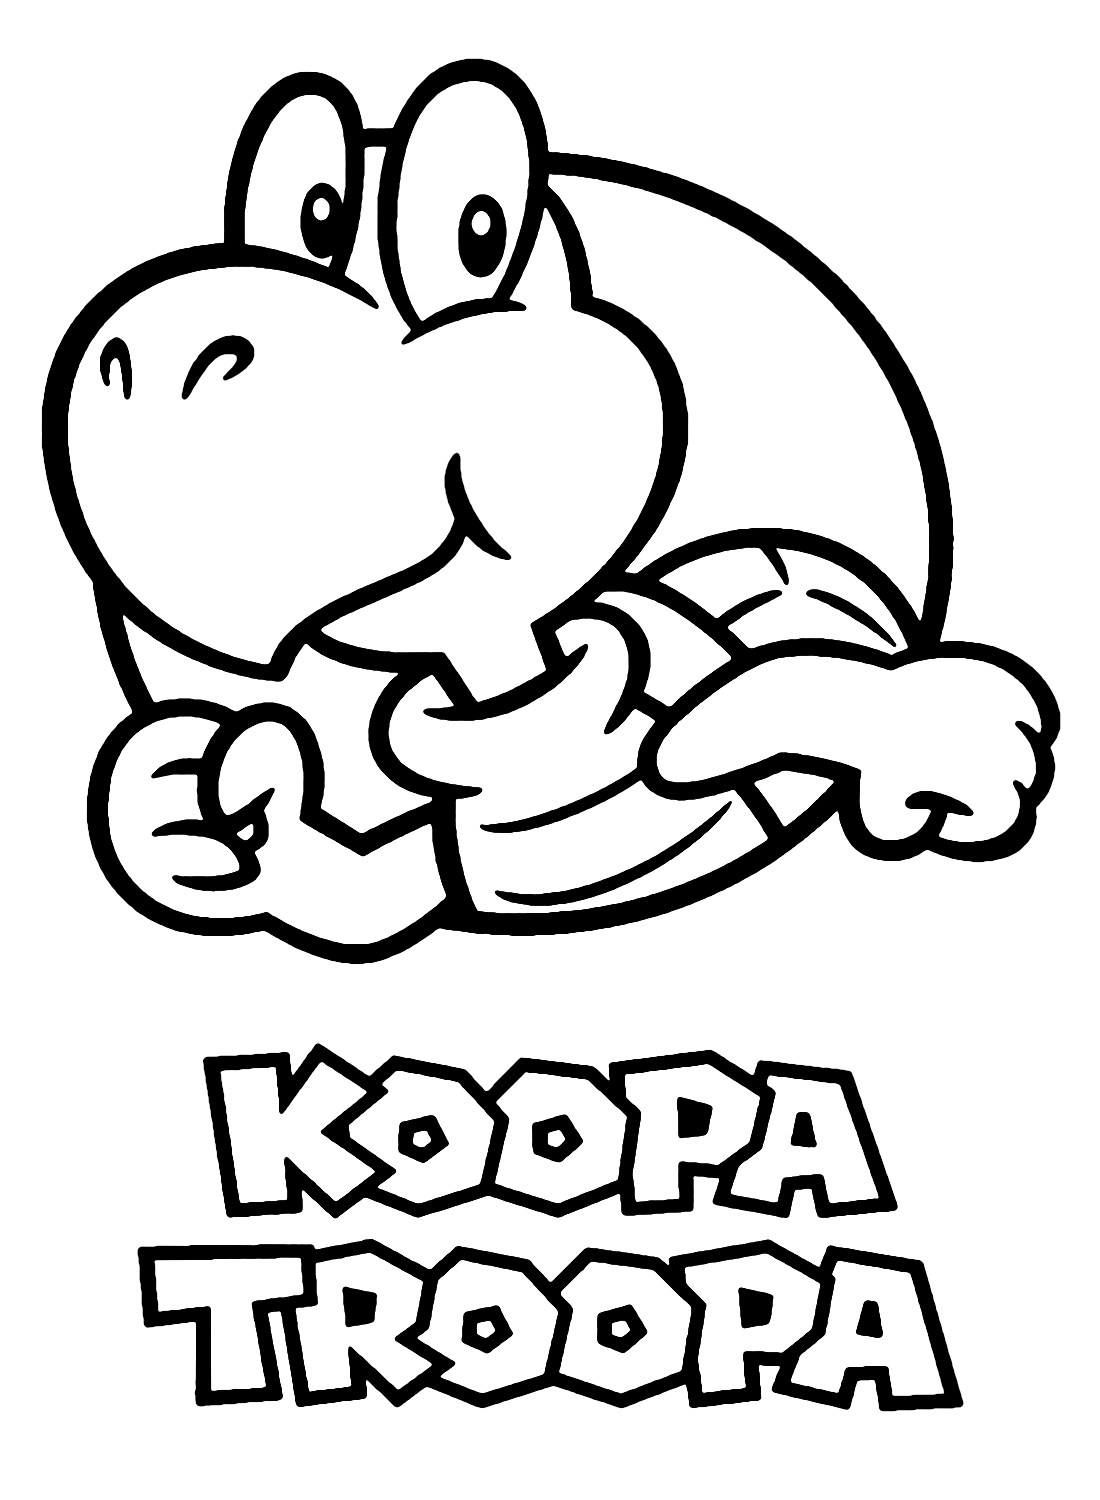 Koopa troopa coloring pages printable for free download